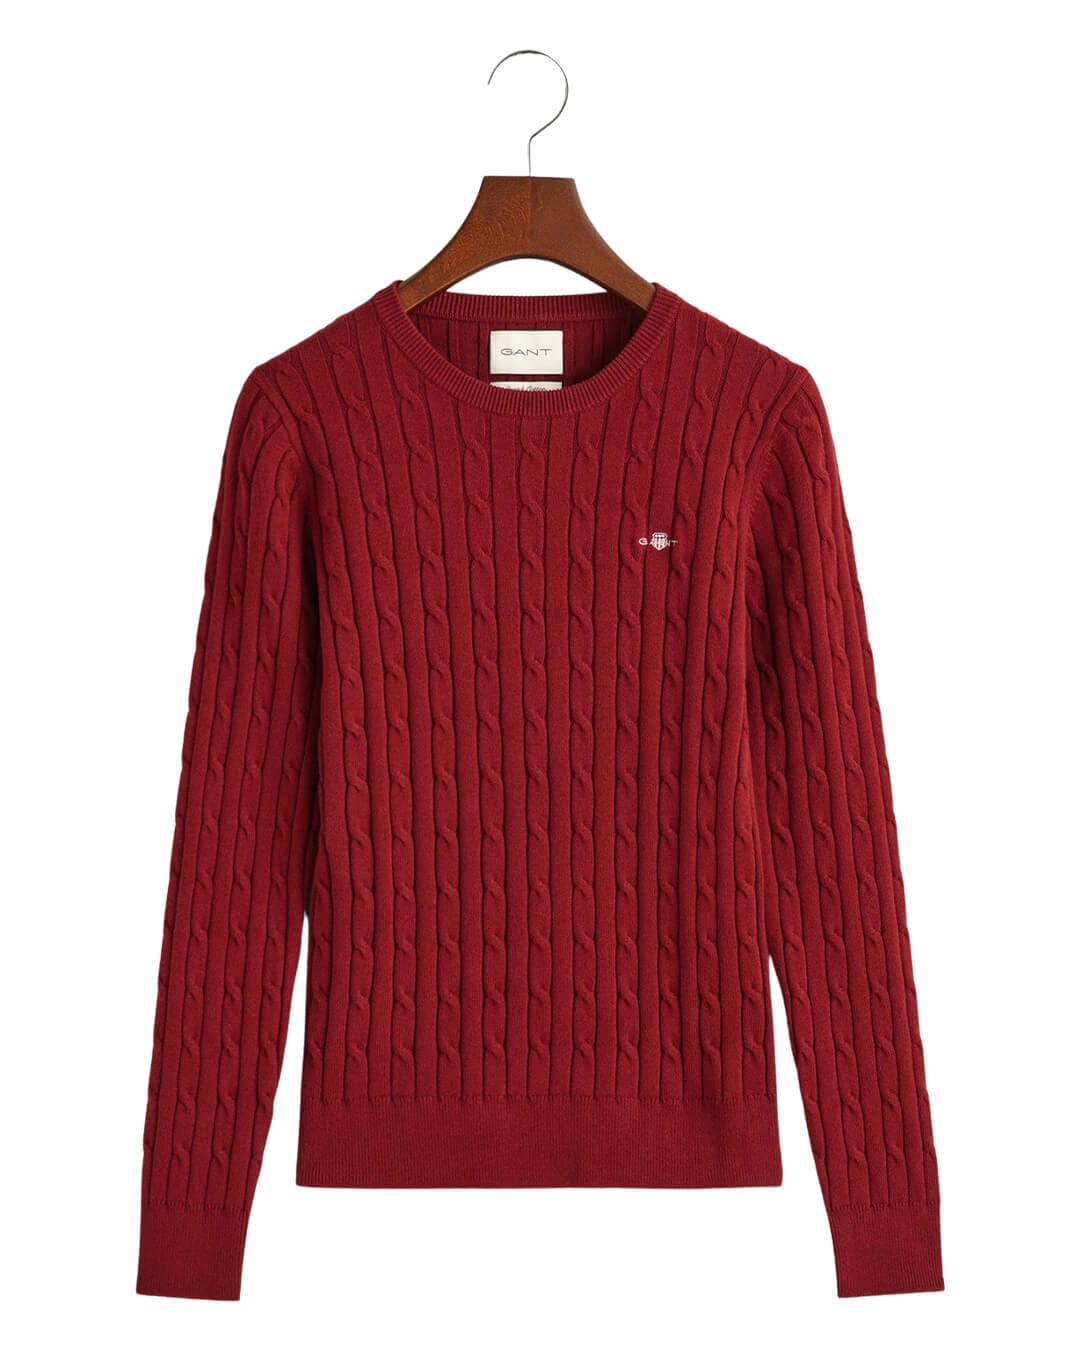 Gant Jumpers Gant Plumped Red Stretch Cotton Cable Knit Crew Neck Sweater